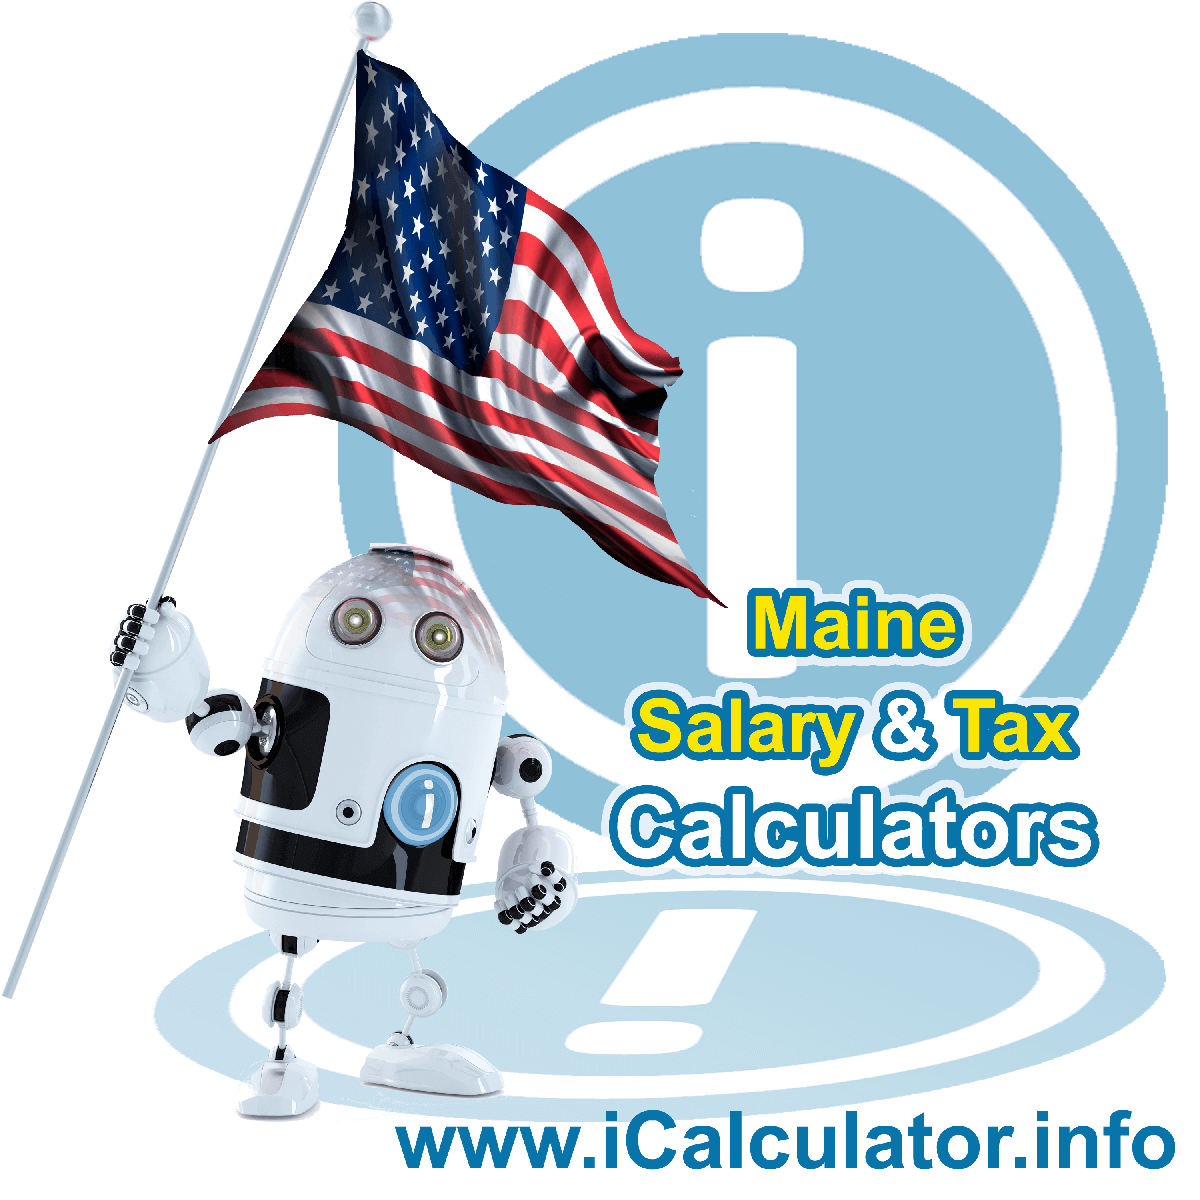 Maine Salary Calculator 2023 | iCalculator™ | The Maine Salary Calculator allows you to quickly calculate your salary after tax including Maine State Tax, Federal State Tax, Medicare Deductions, Social Security, Capital Gains and other income tax and salary deductions complete with supporting Maine state tax tables 